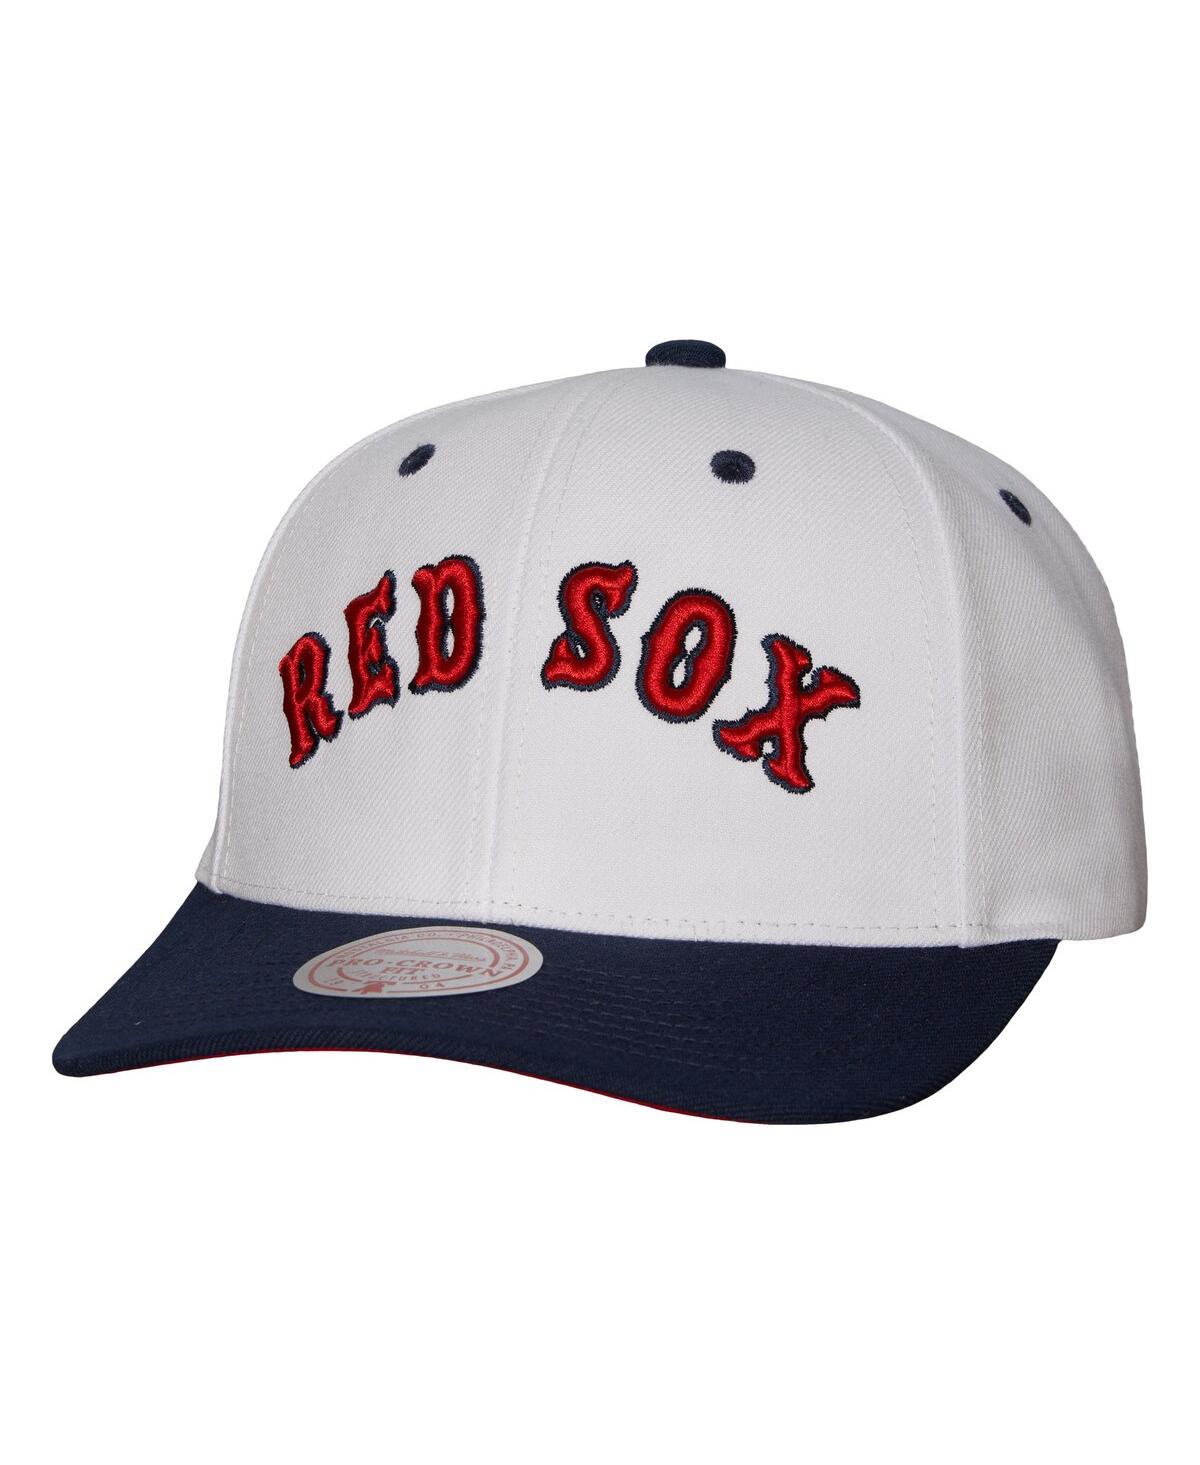 Mitchell & Ness Men's  White Boston Red Sox Cooperstown Collection Pro Crown Snapback Hat